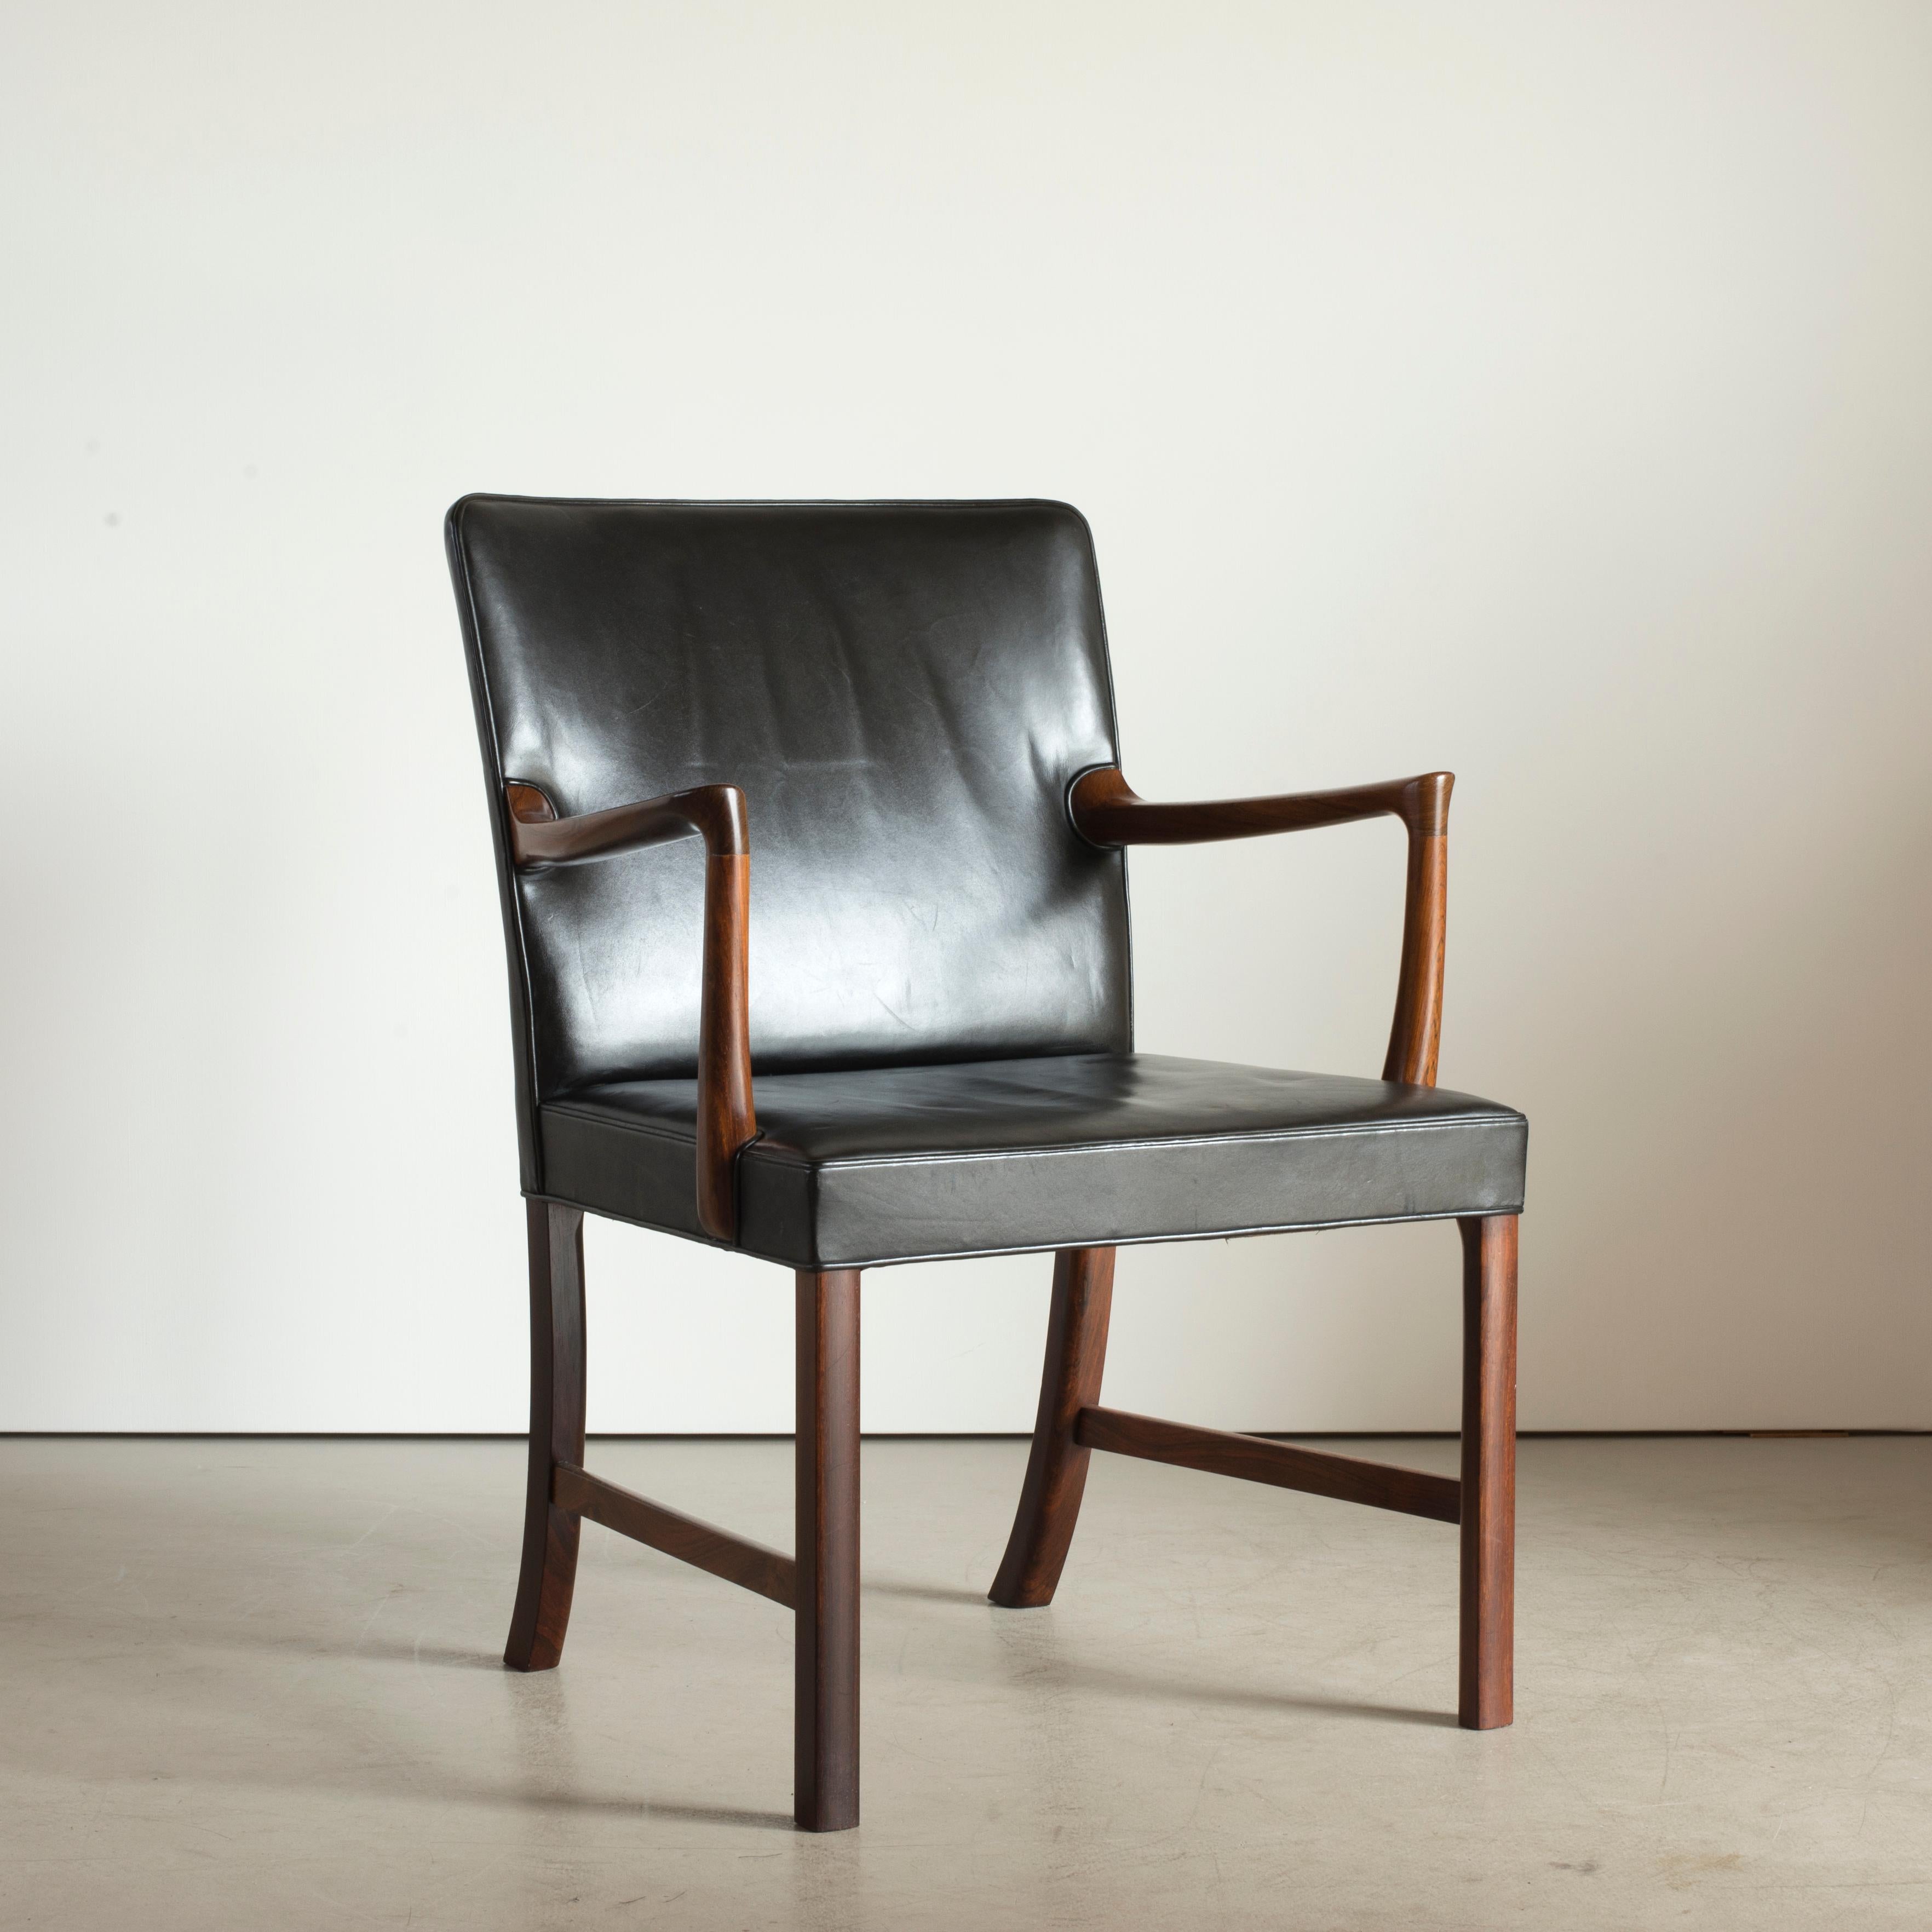 Ole Wanscher armchair of Brazilian rosewood, seat and back upholstered with black leather. Executed by A.J. Iversen, Copenhagen.